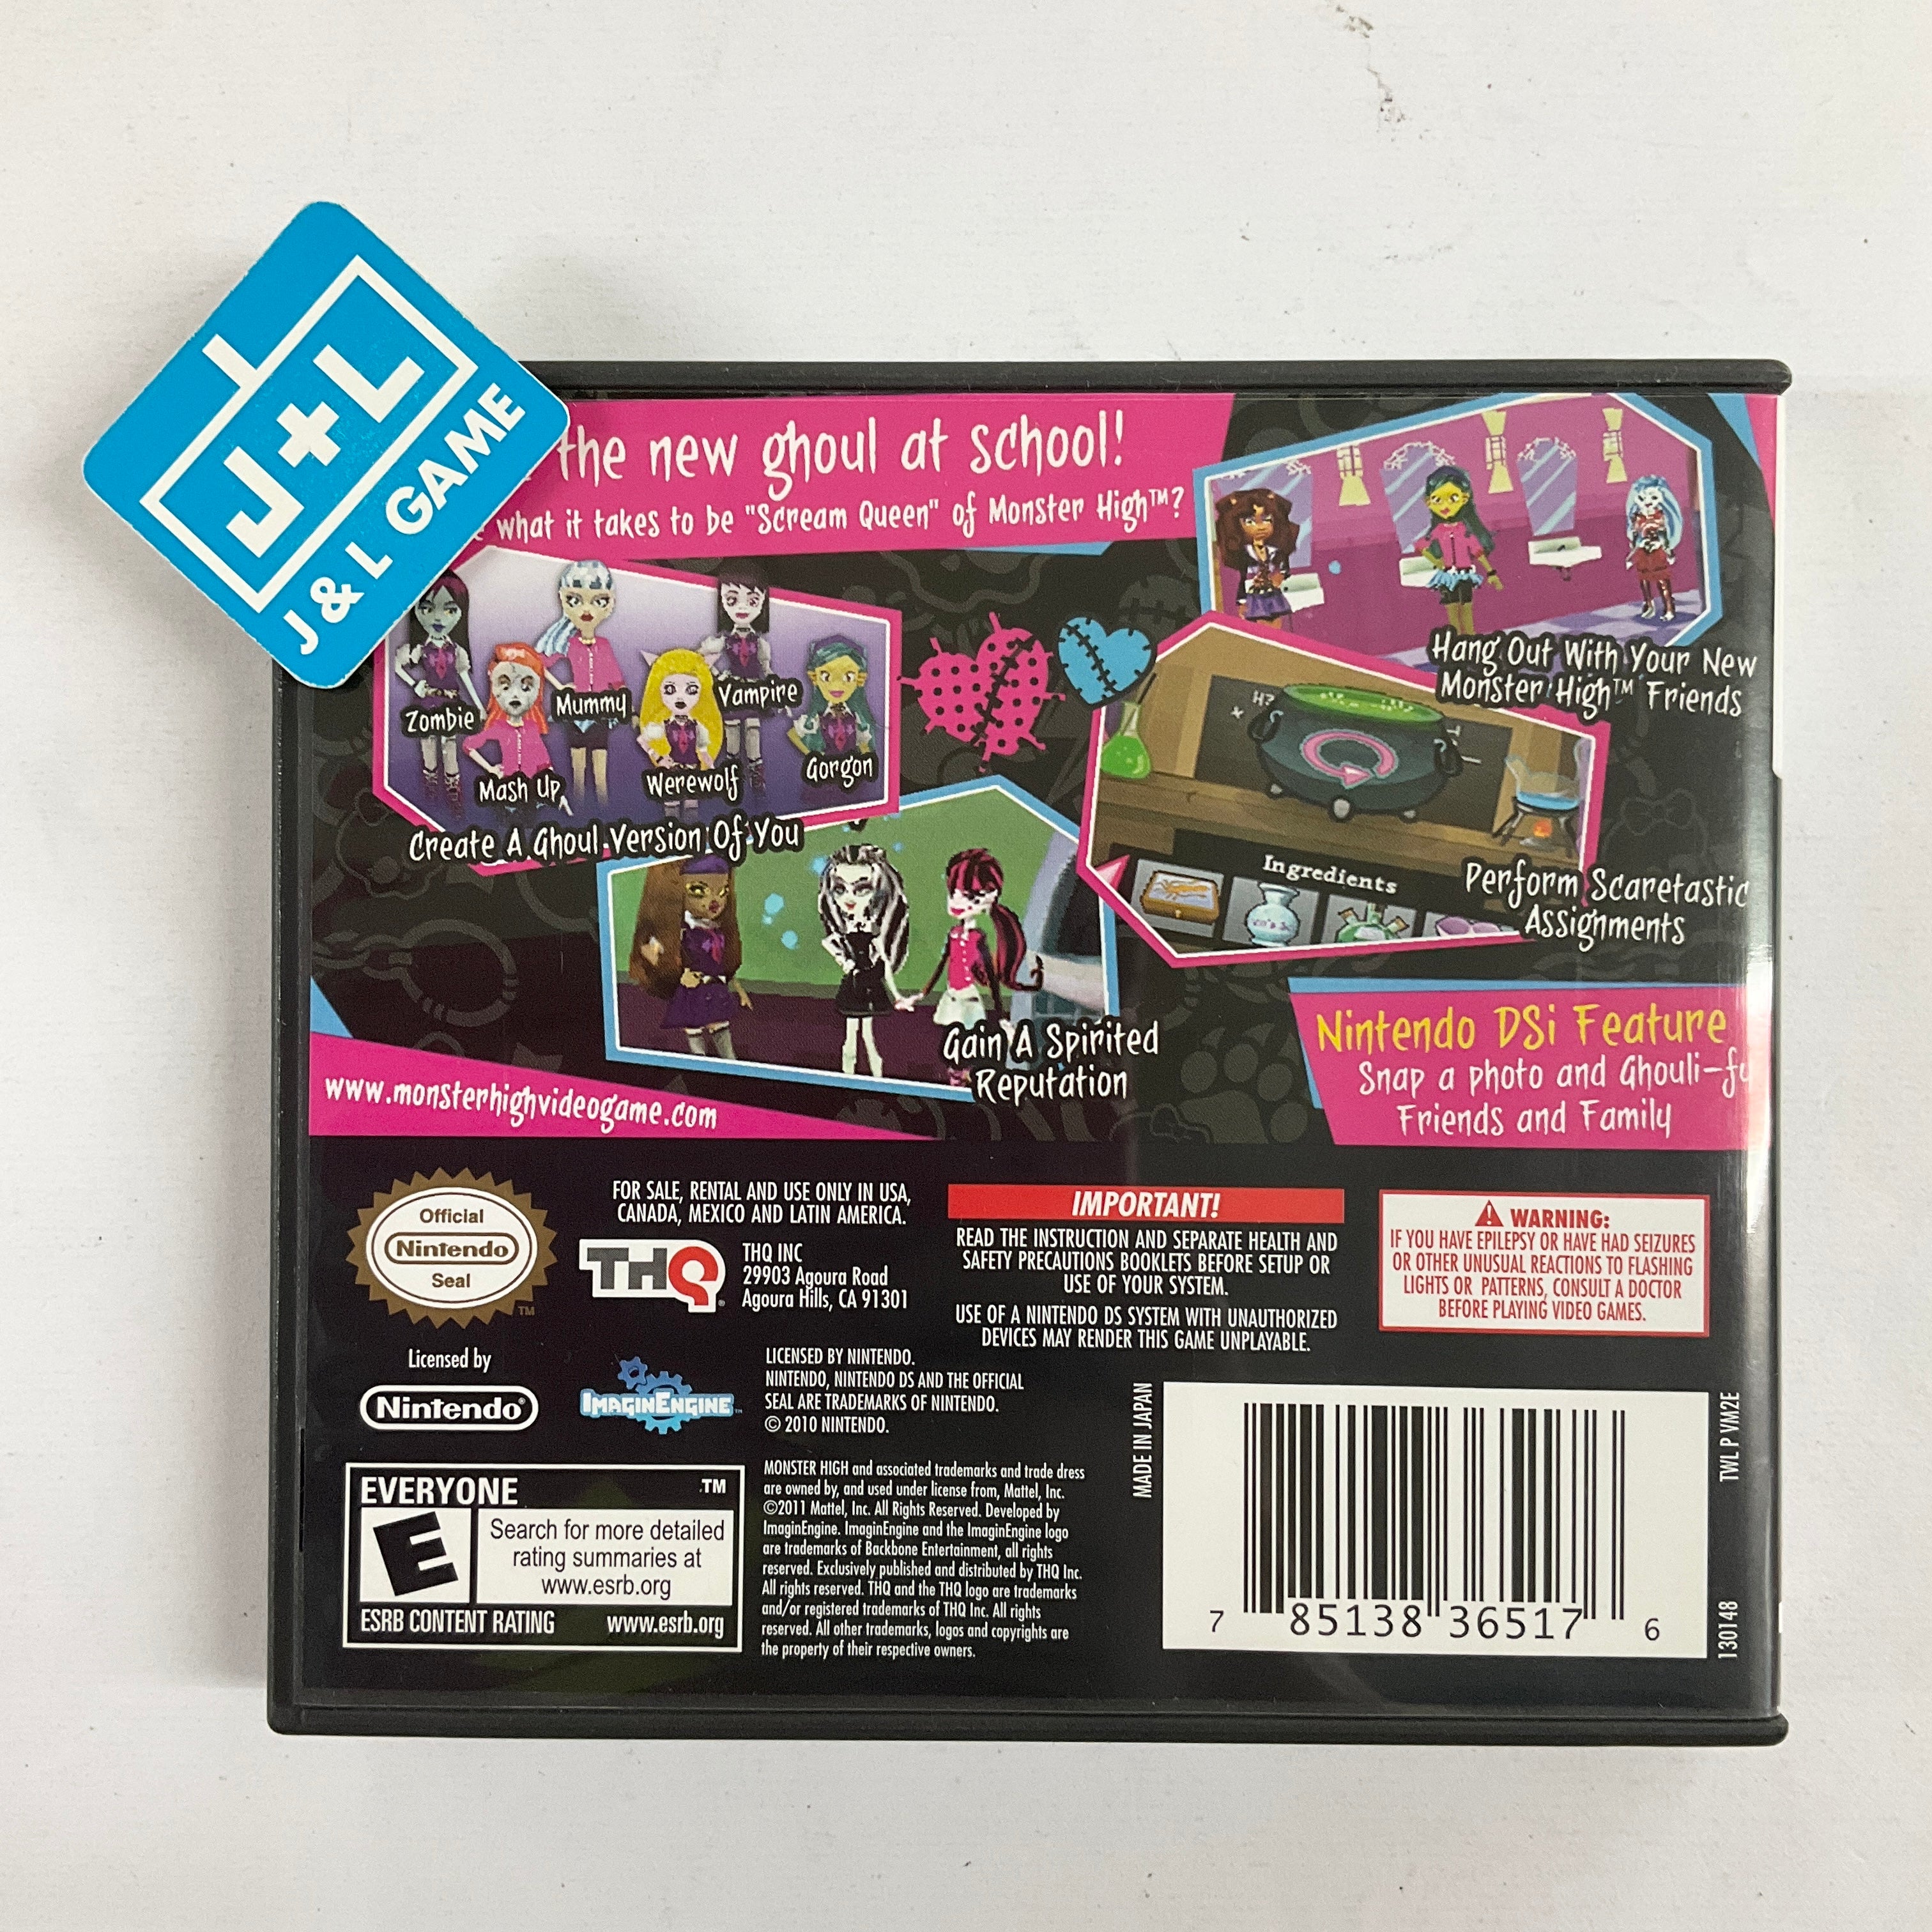 Monster High: Ghoul Spirit - (NDS) Nintendo DS [Pre-Owned] Video Games THQ   